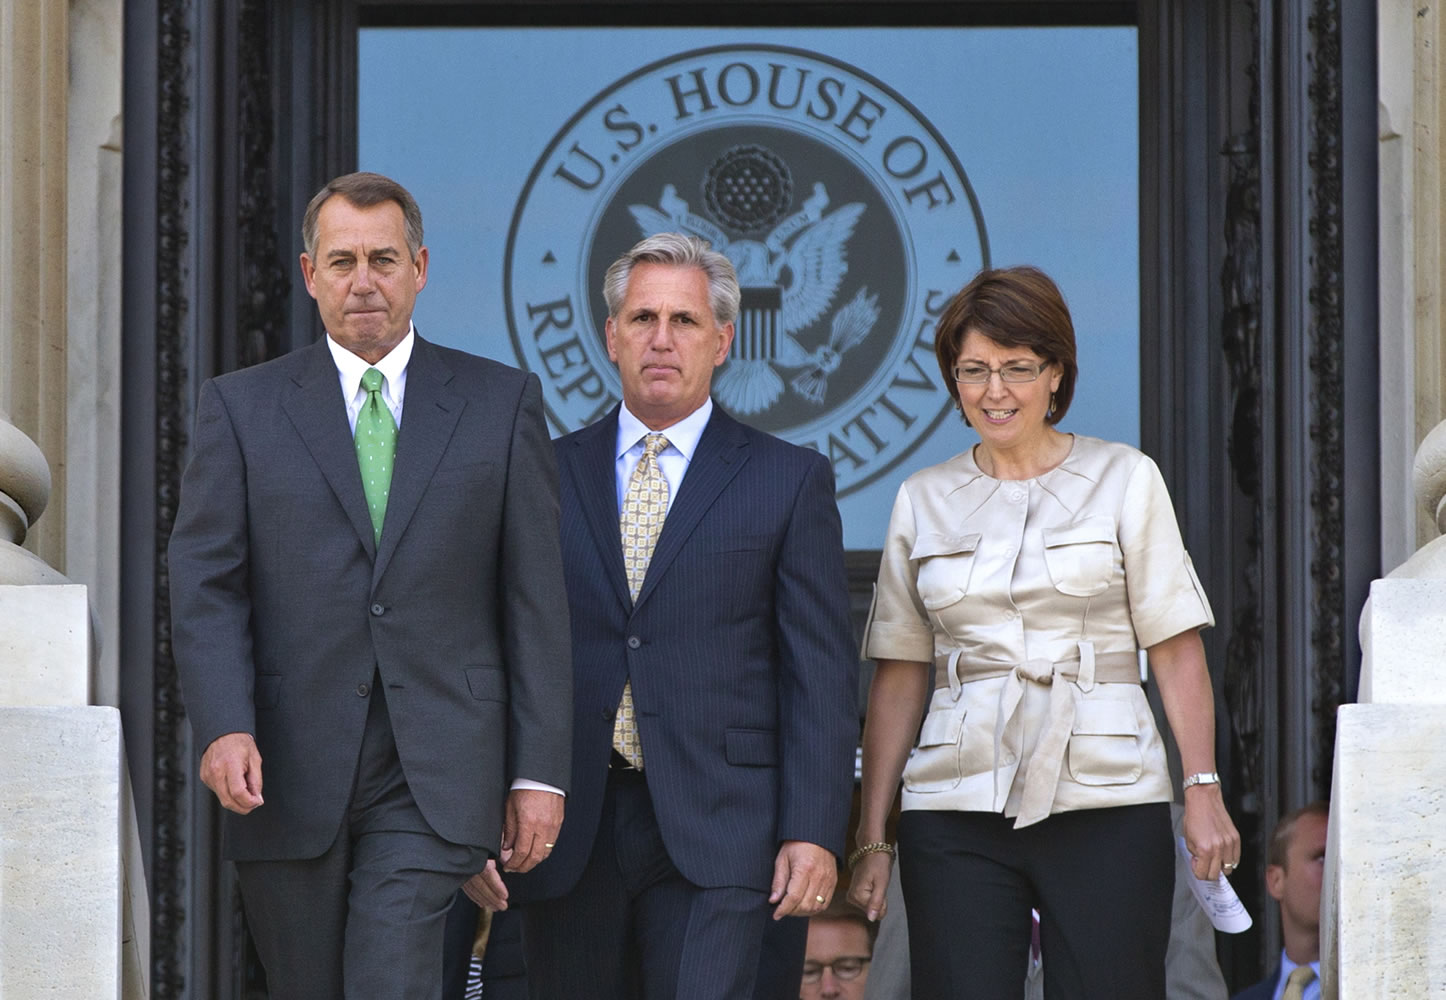 House Speaker John Boehner, left, R-Ohio; House Majority Whip Kevin McCarthy, R-Calif.; and Rep. Cathy McMorris Rodgers, R-Wash., the Republican Conference chairwoman, exit the House side of the U.S.